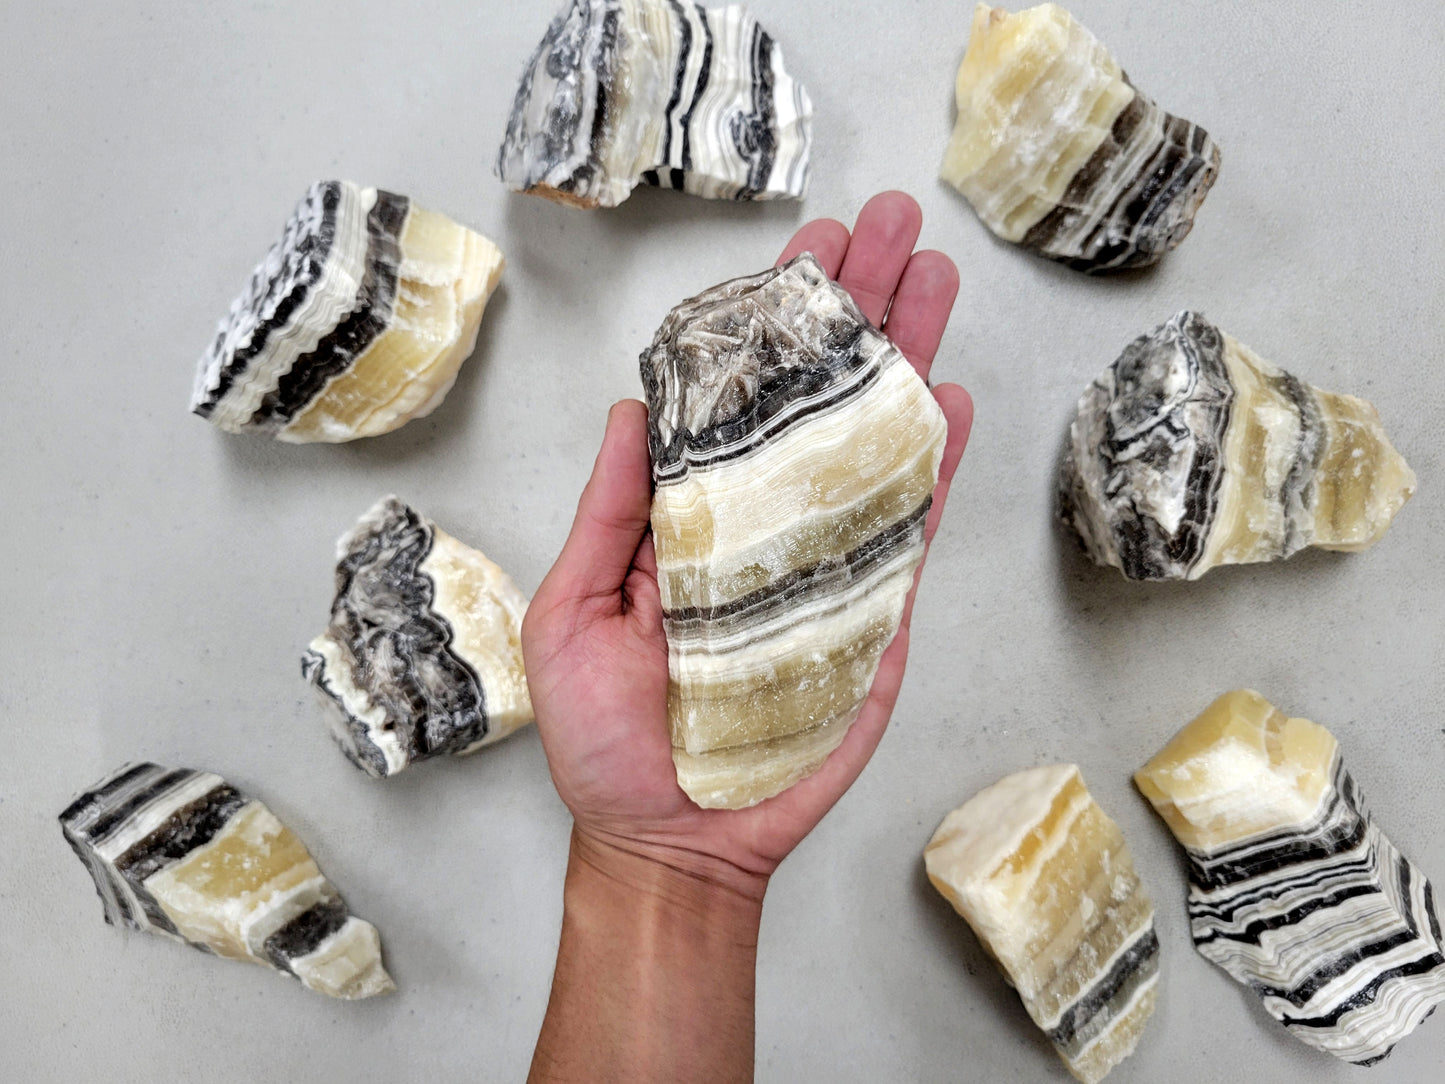 Large Zebra Calcite Crystal Slabs from Mexico